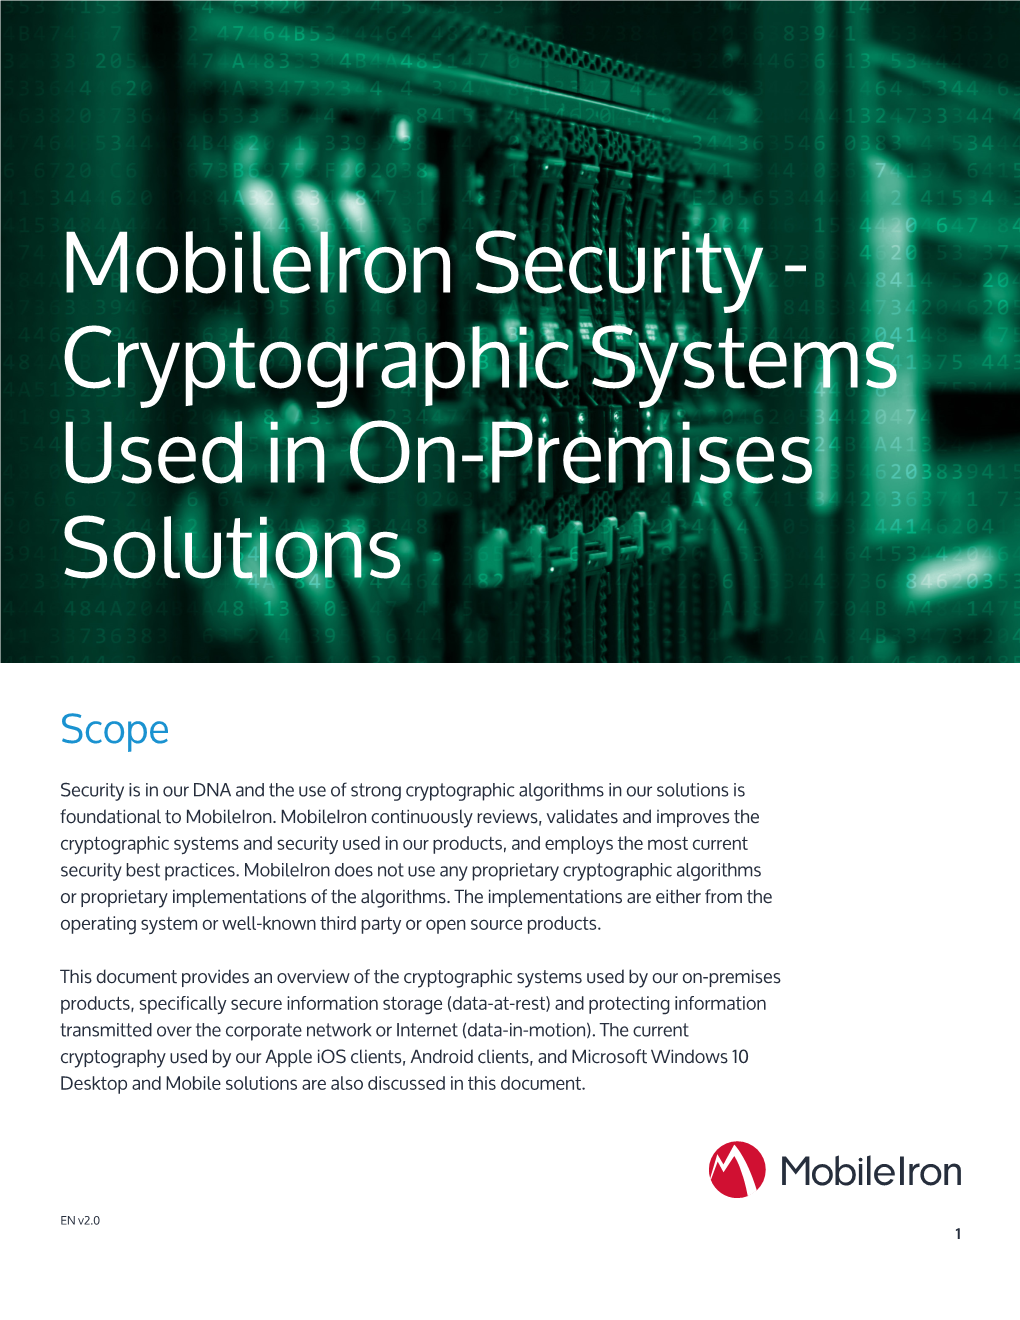 Mobileiron Security - Cryptographic Systems Used in On-Premises Solutions